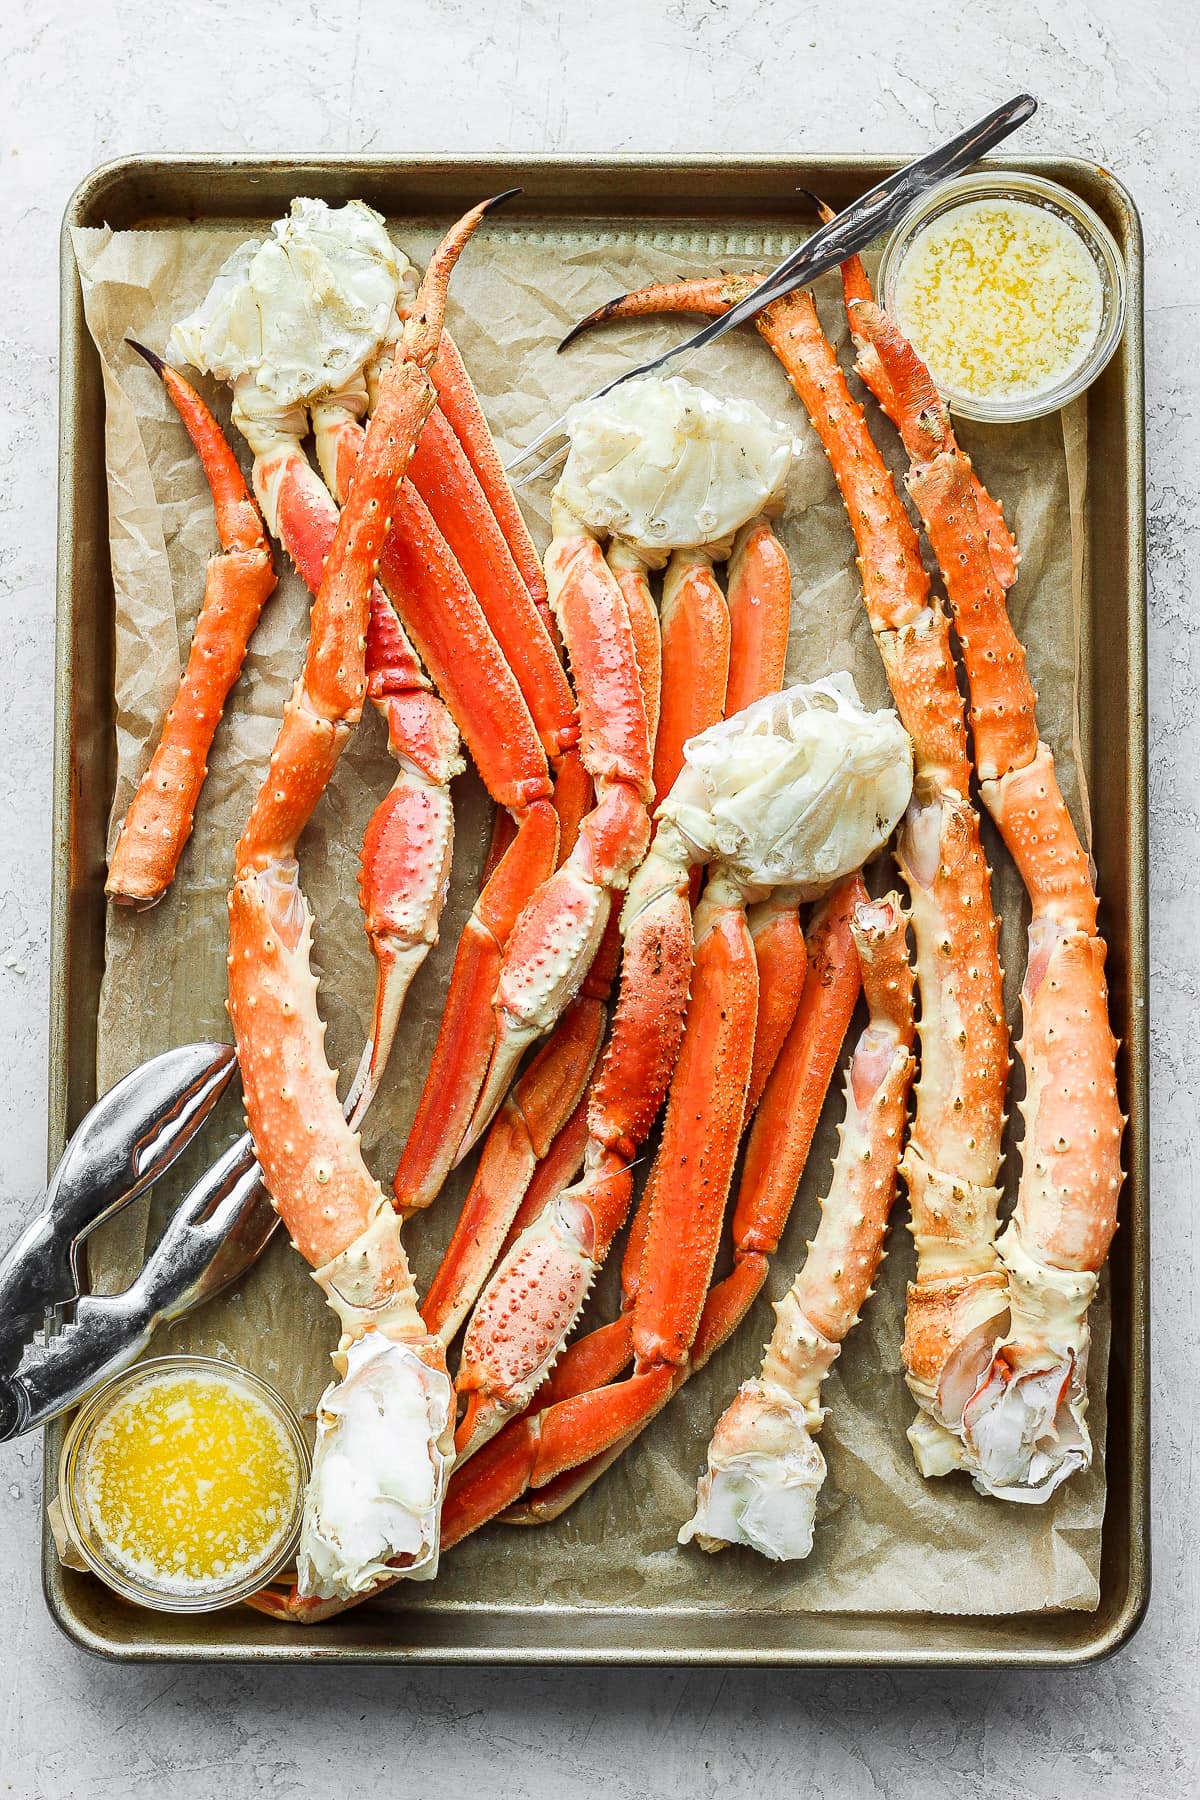 https://thewoodenskillet.com/wp-content/uploads/2021/02/how-to-bake-crab-legs-9.jpg